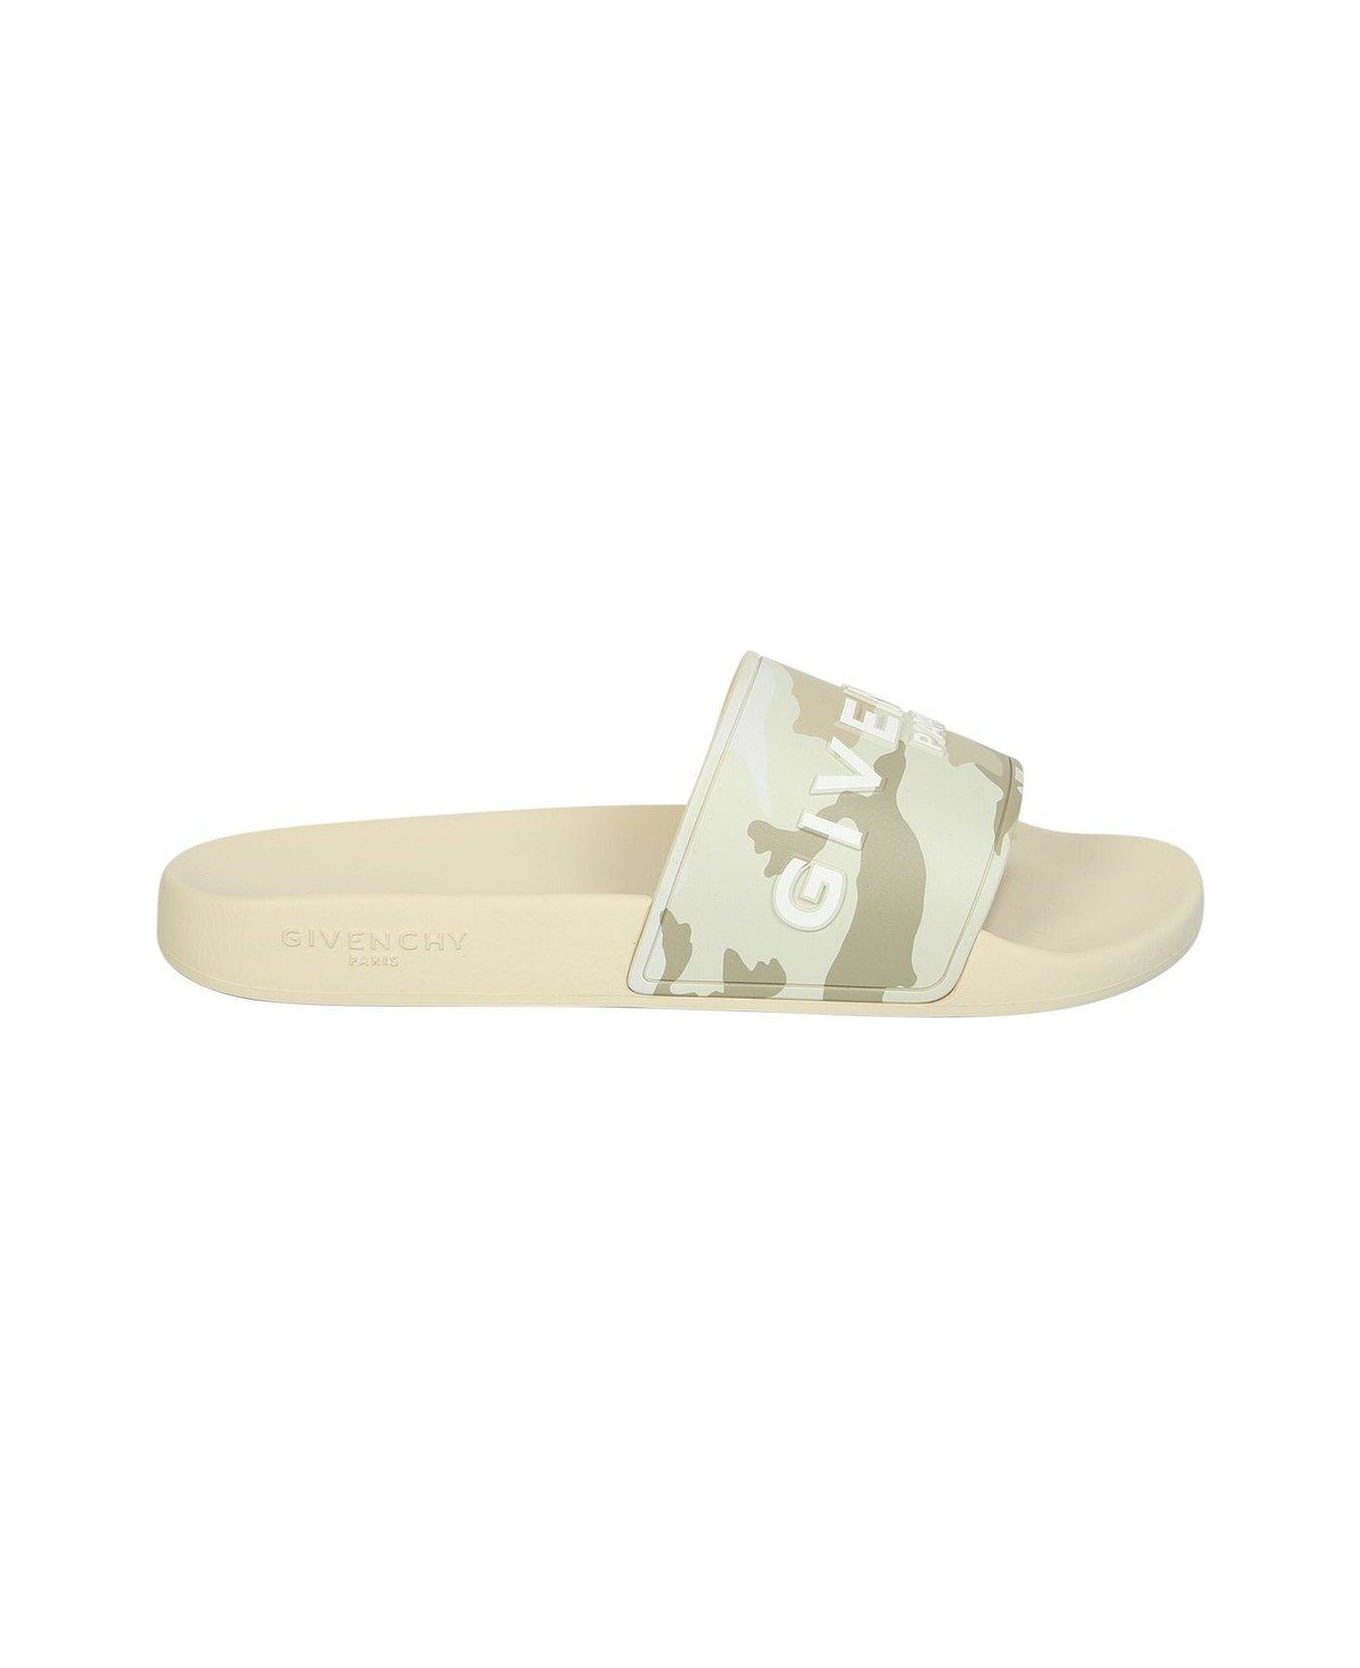 Givenchy Camouflage Printed Flat Sandals